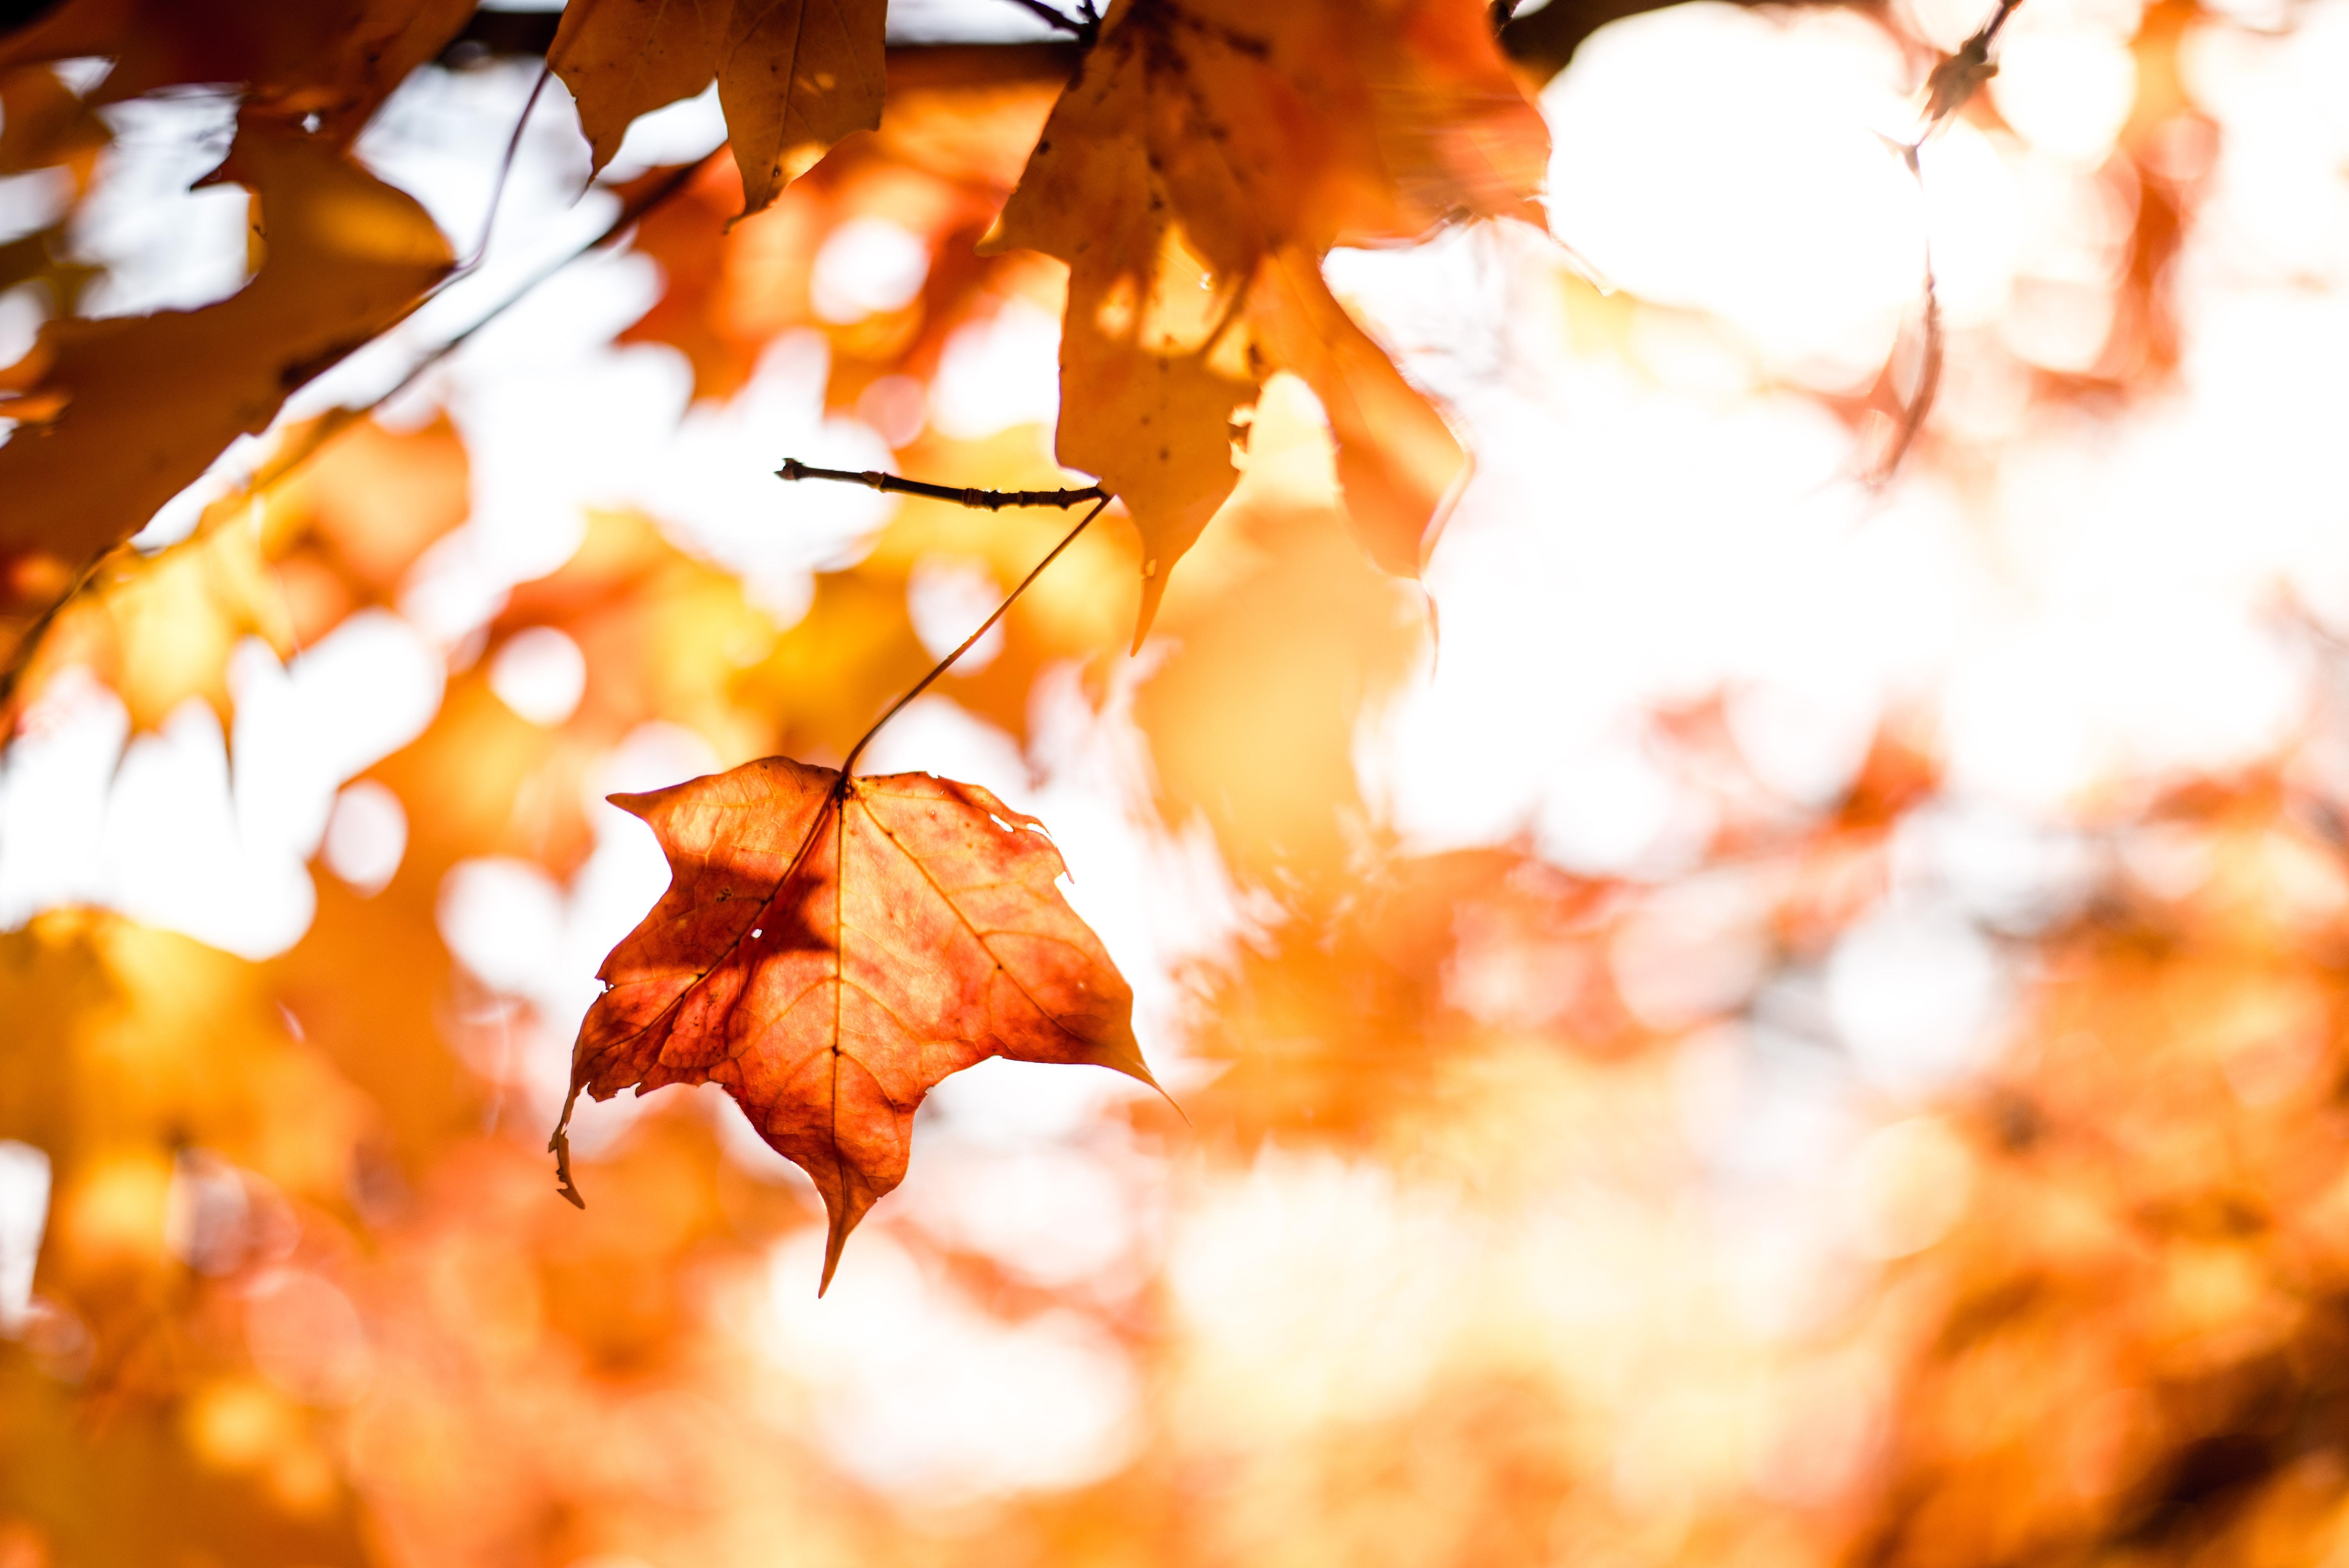 30 Fall Leaf Puns For Instagram When You're Falling Hard For The Season